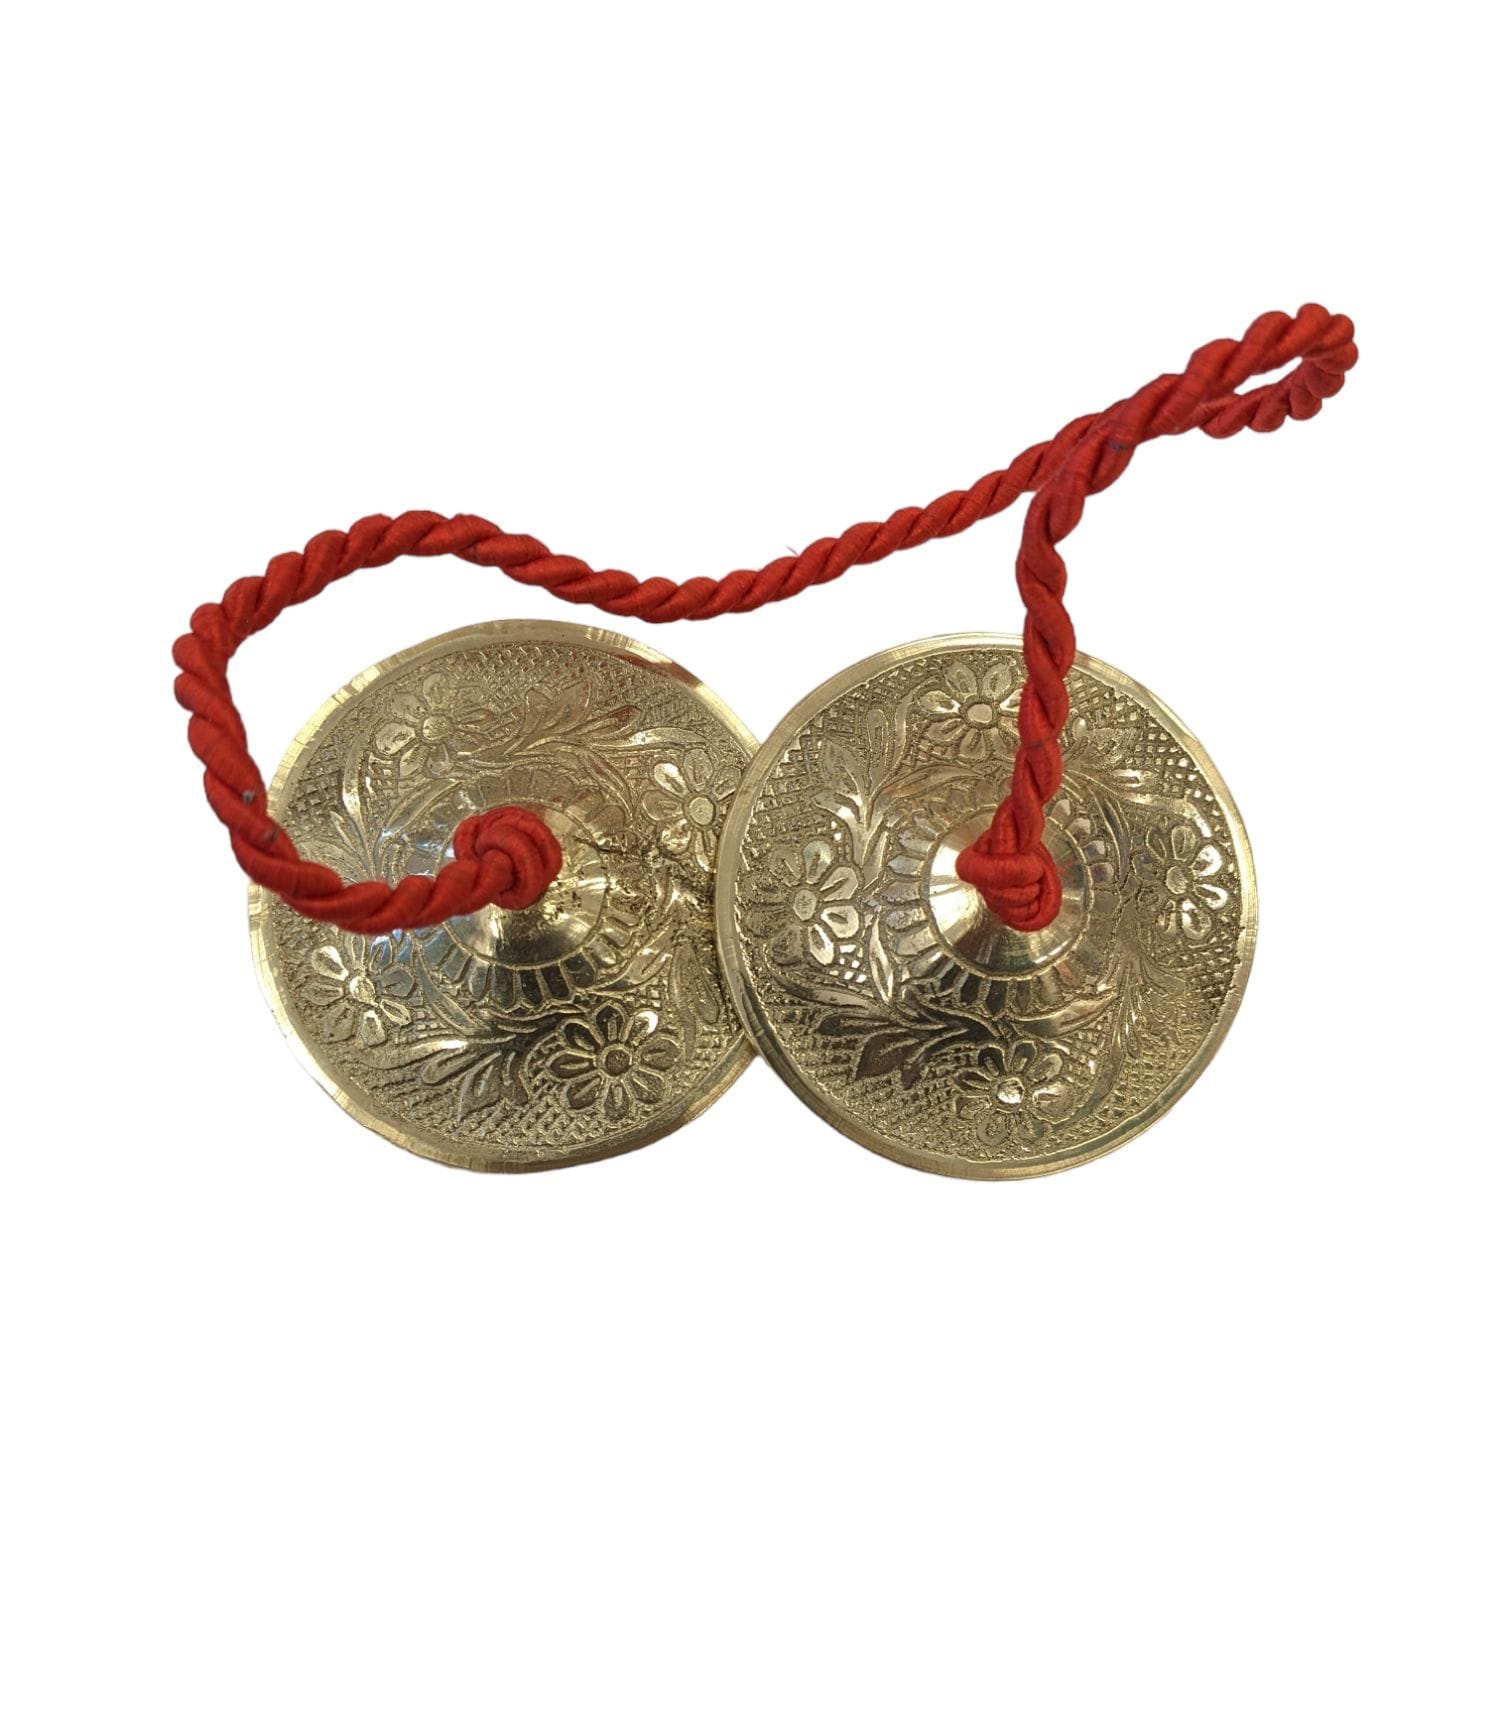 Image of Brass cymbals also called as manjira used for mediatation and music